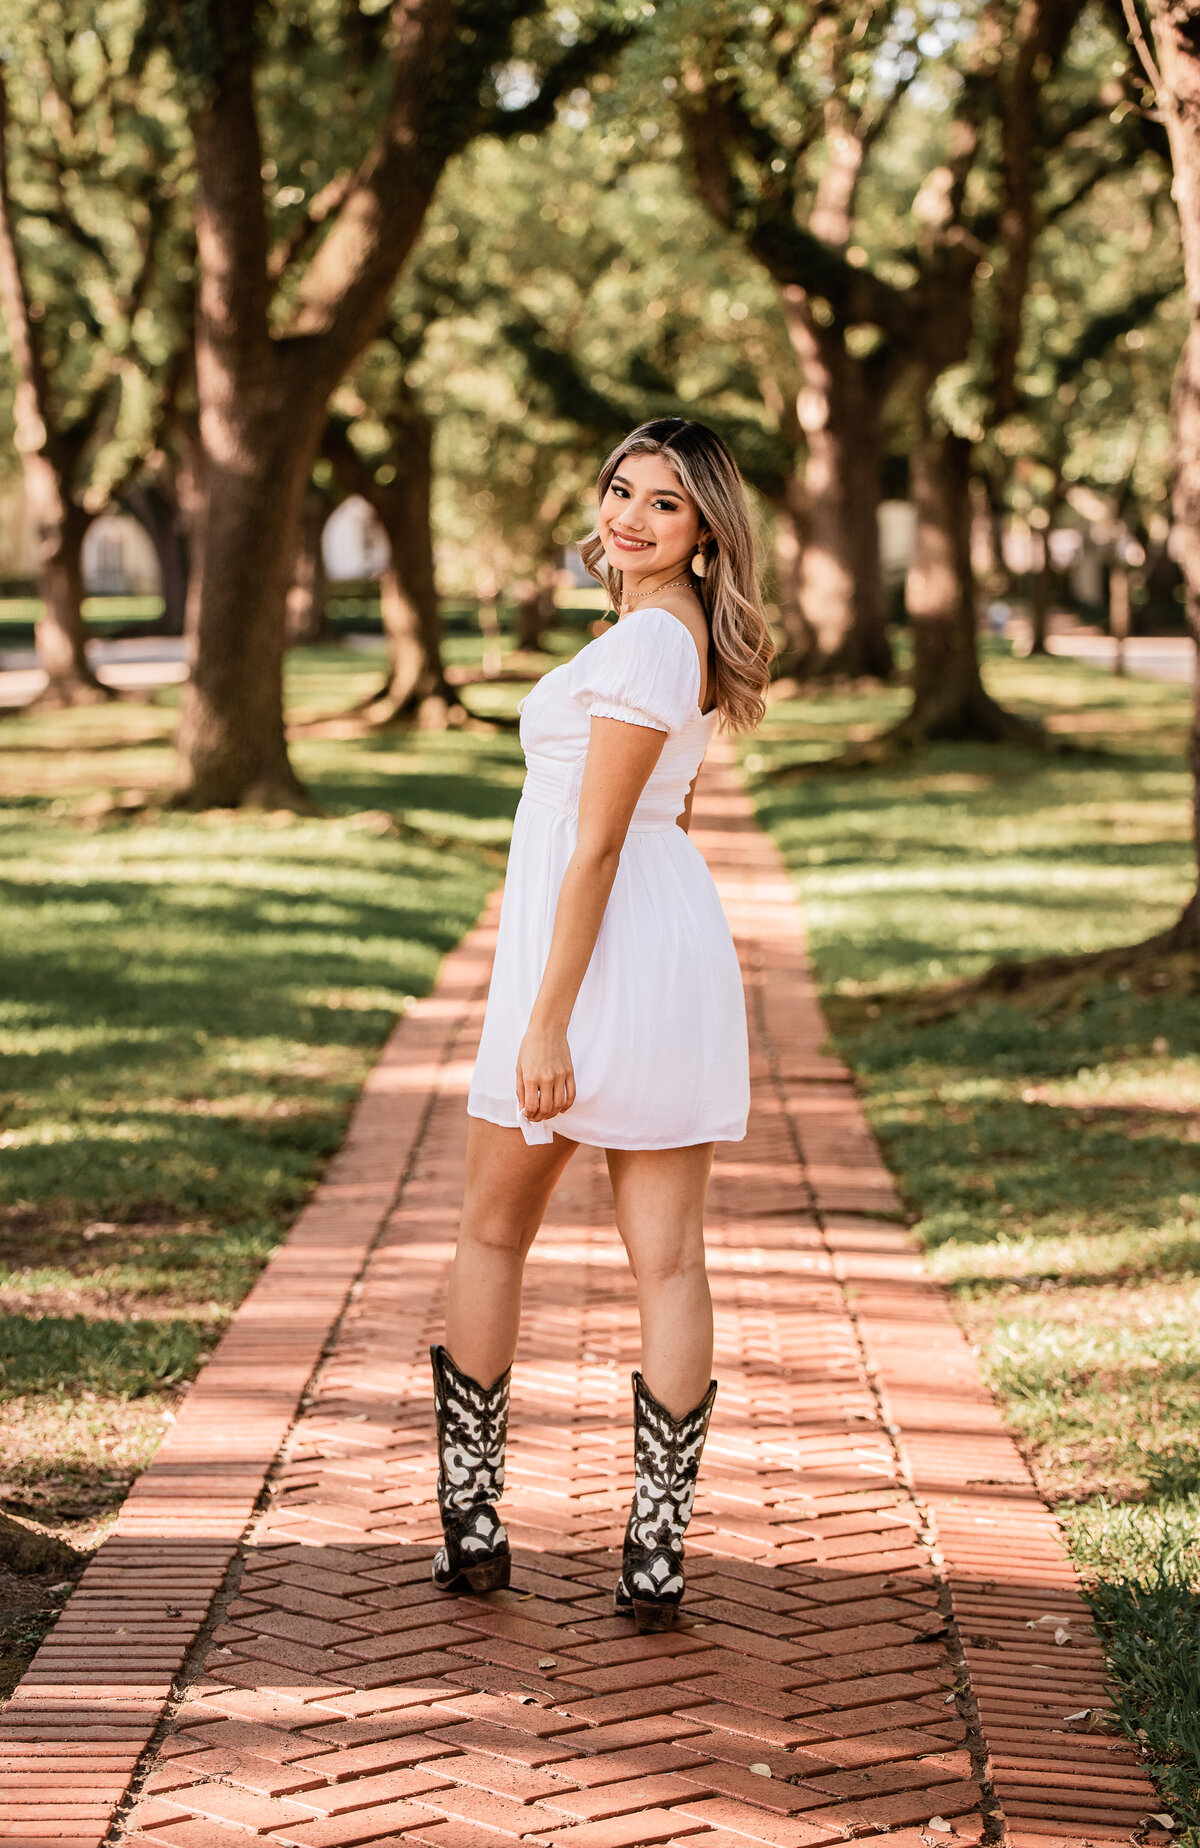 A teen girl wearing a white dress and cowboy boots looks over her shoulder on a red brick walkway.